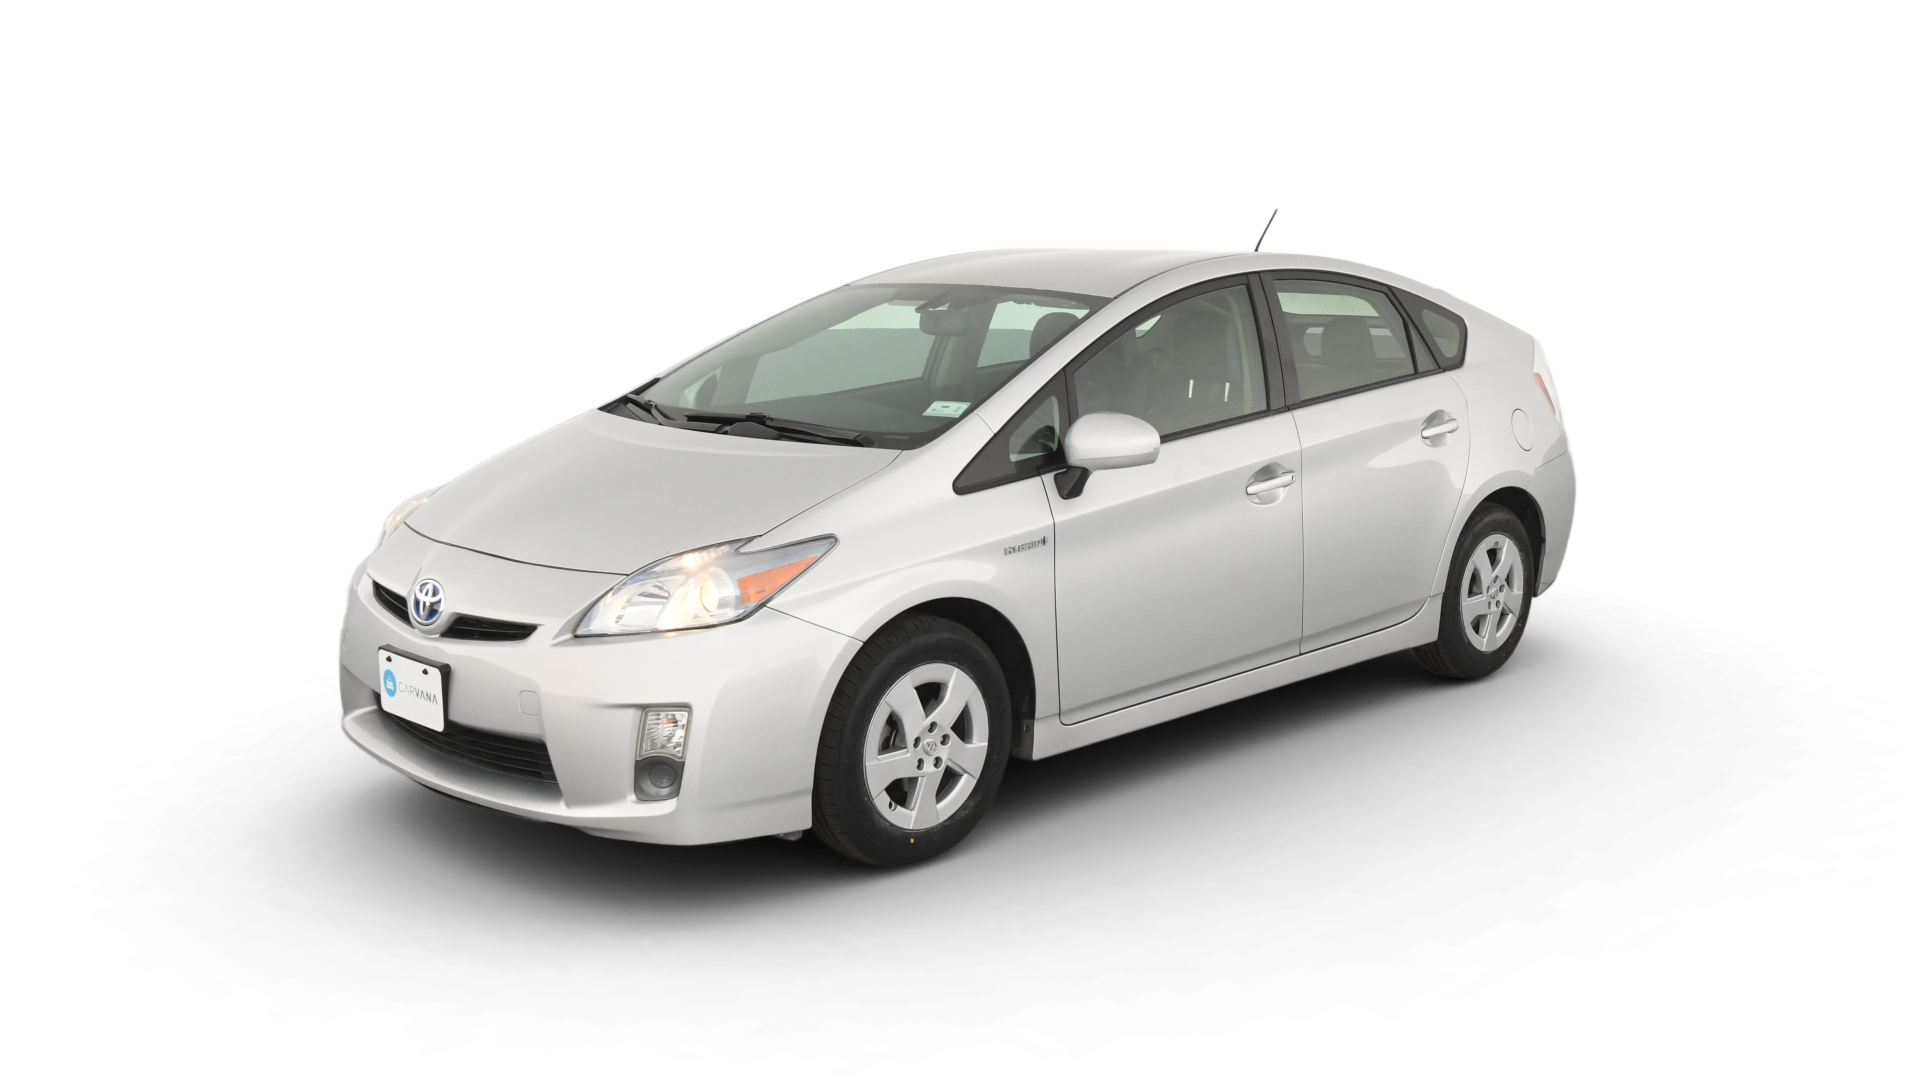 Used Toyota Prius For Sale Online | Carvana